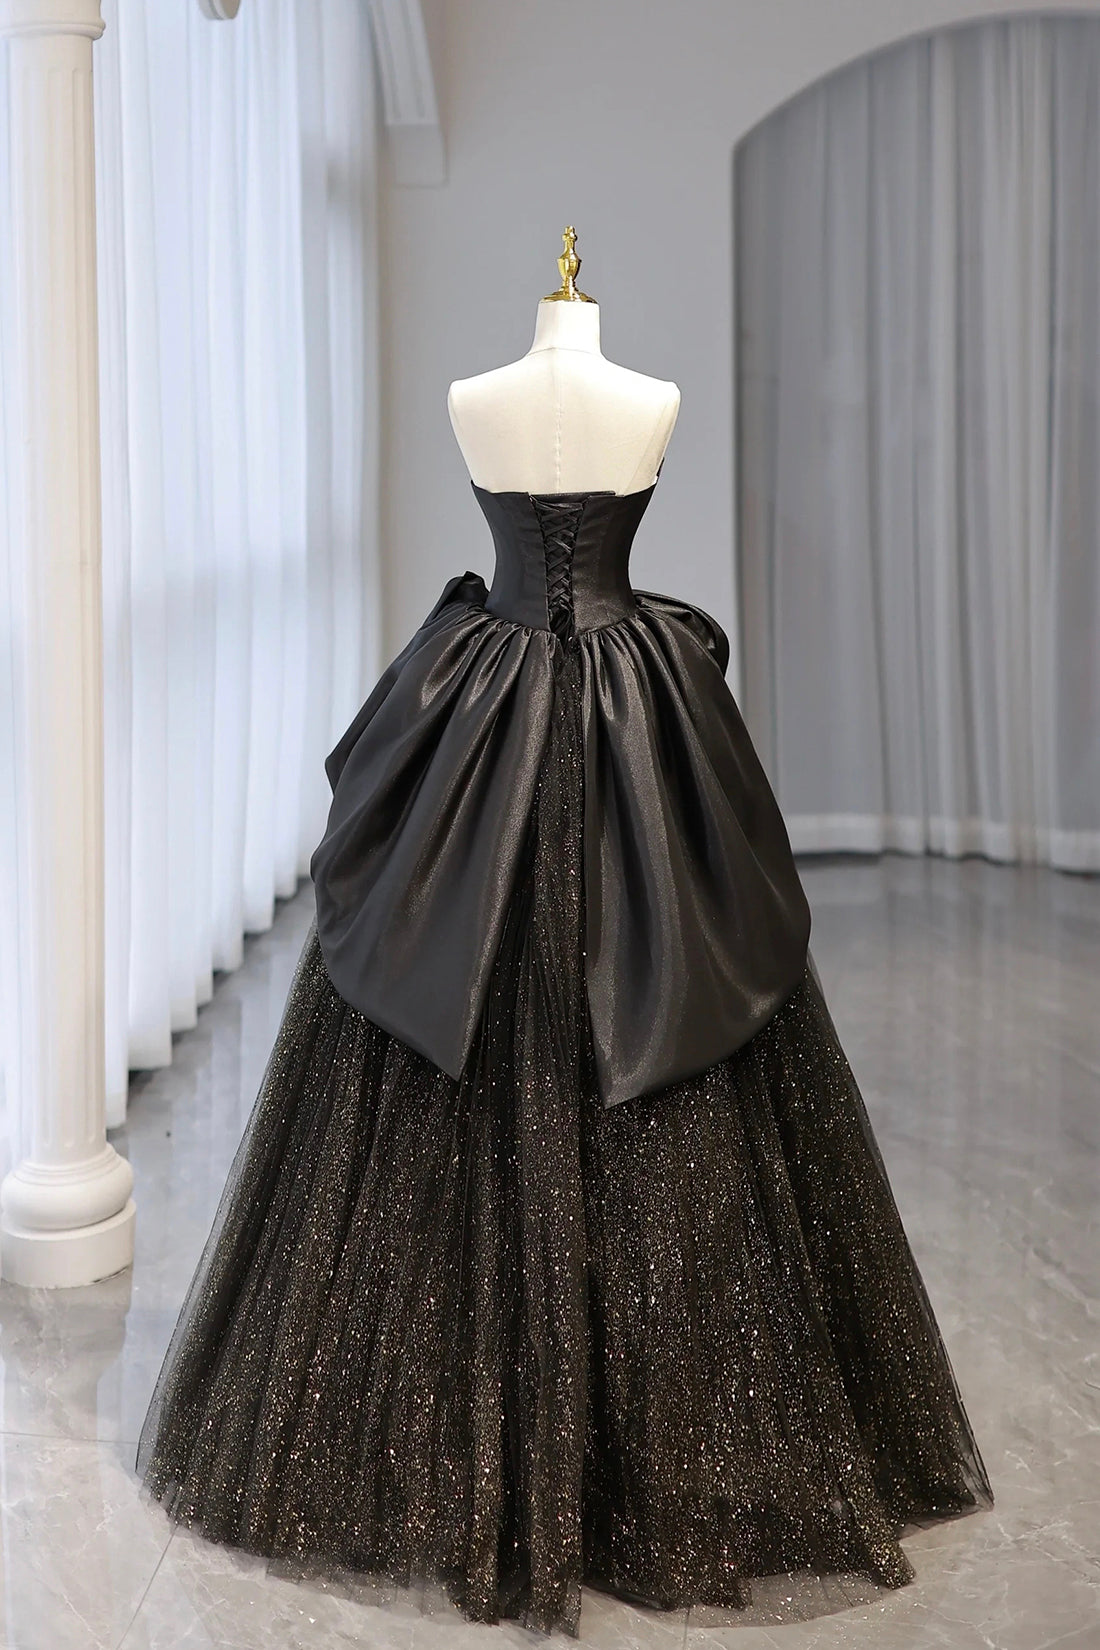 Black Strapless Satin and Tulle Long Prom Dress, Beautiful A-Line Evening Party Dress